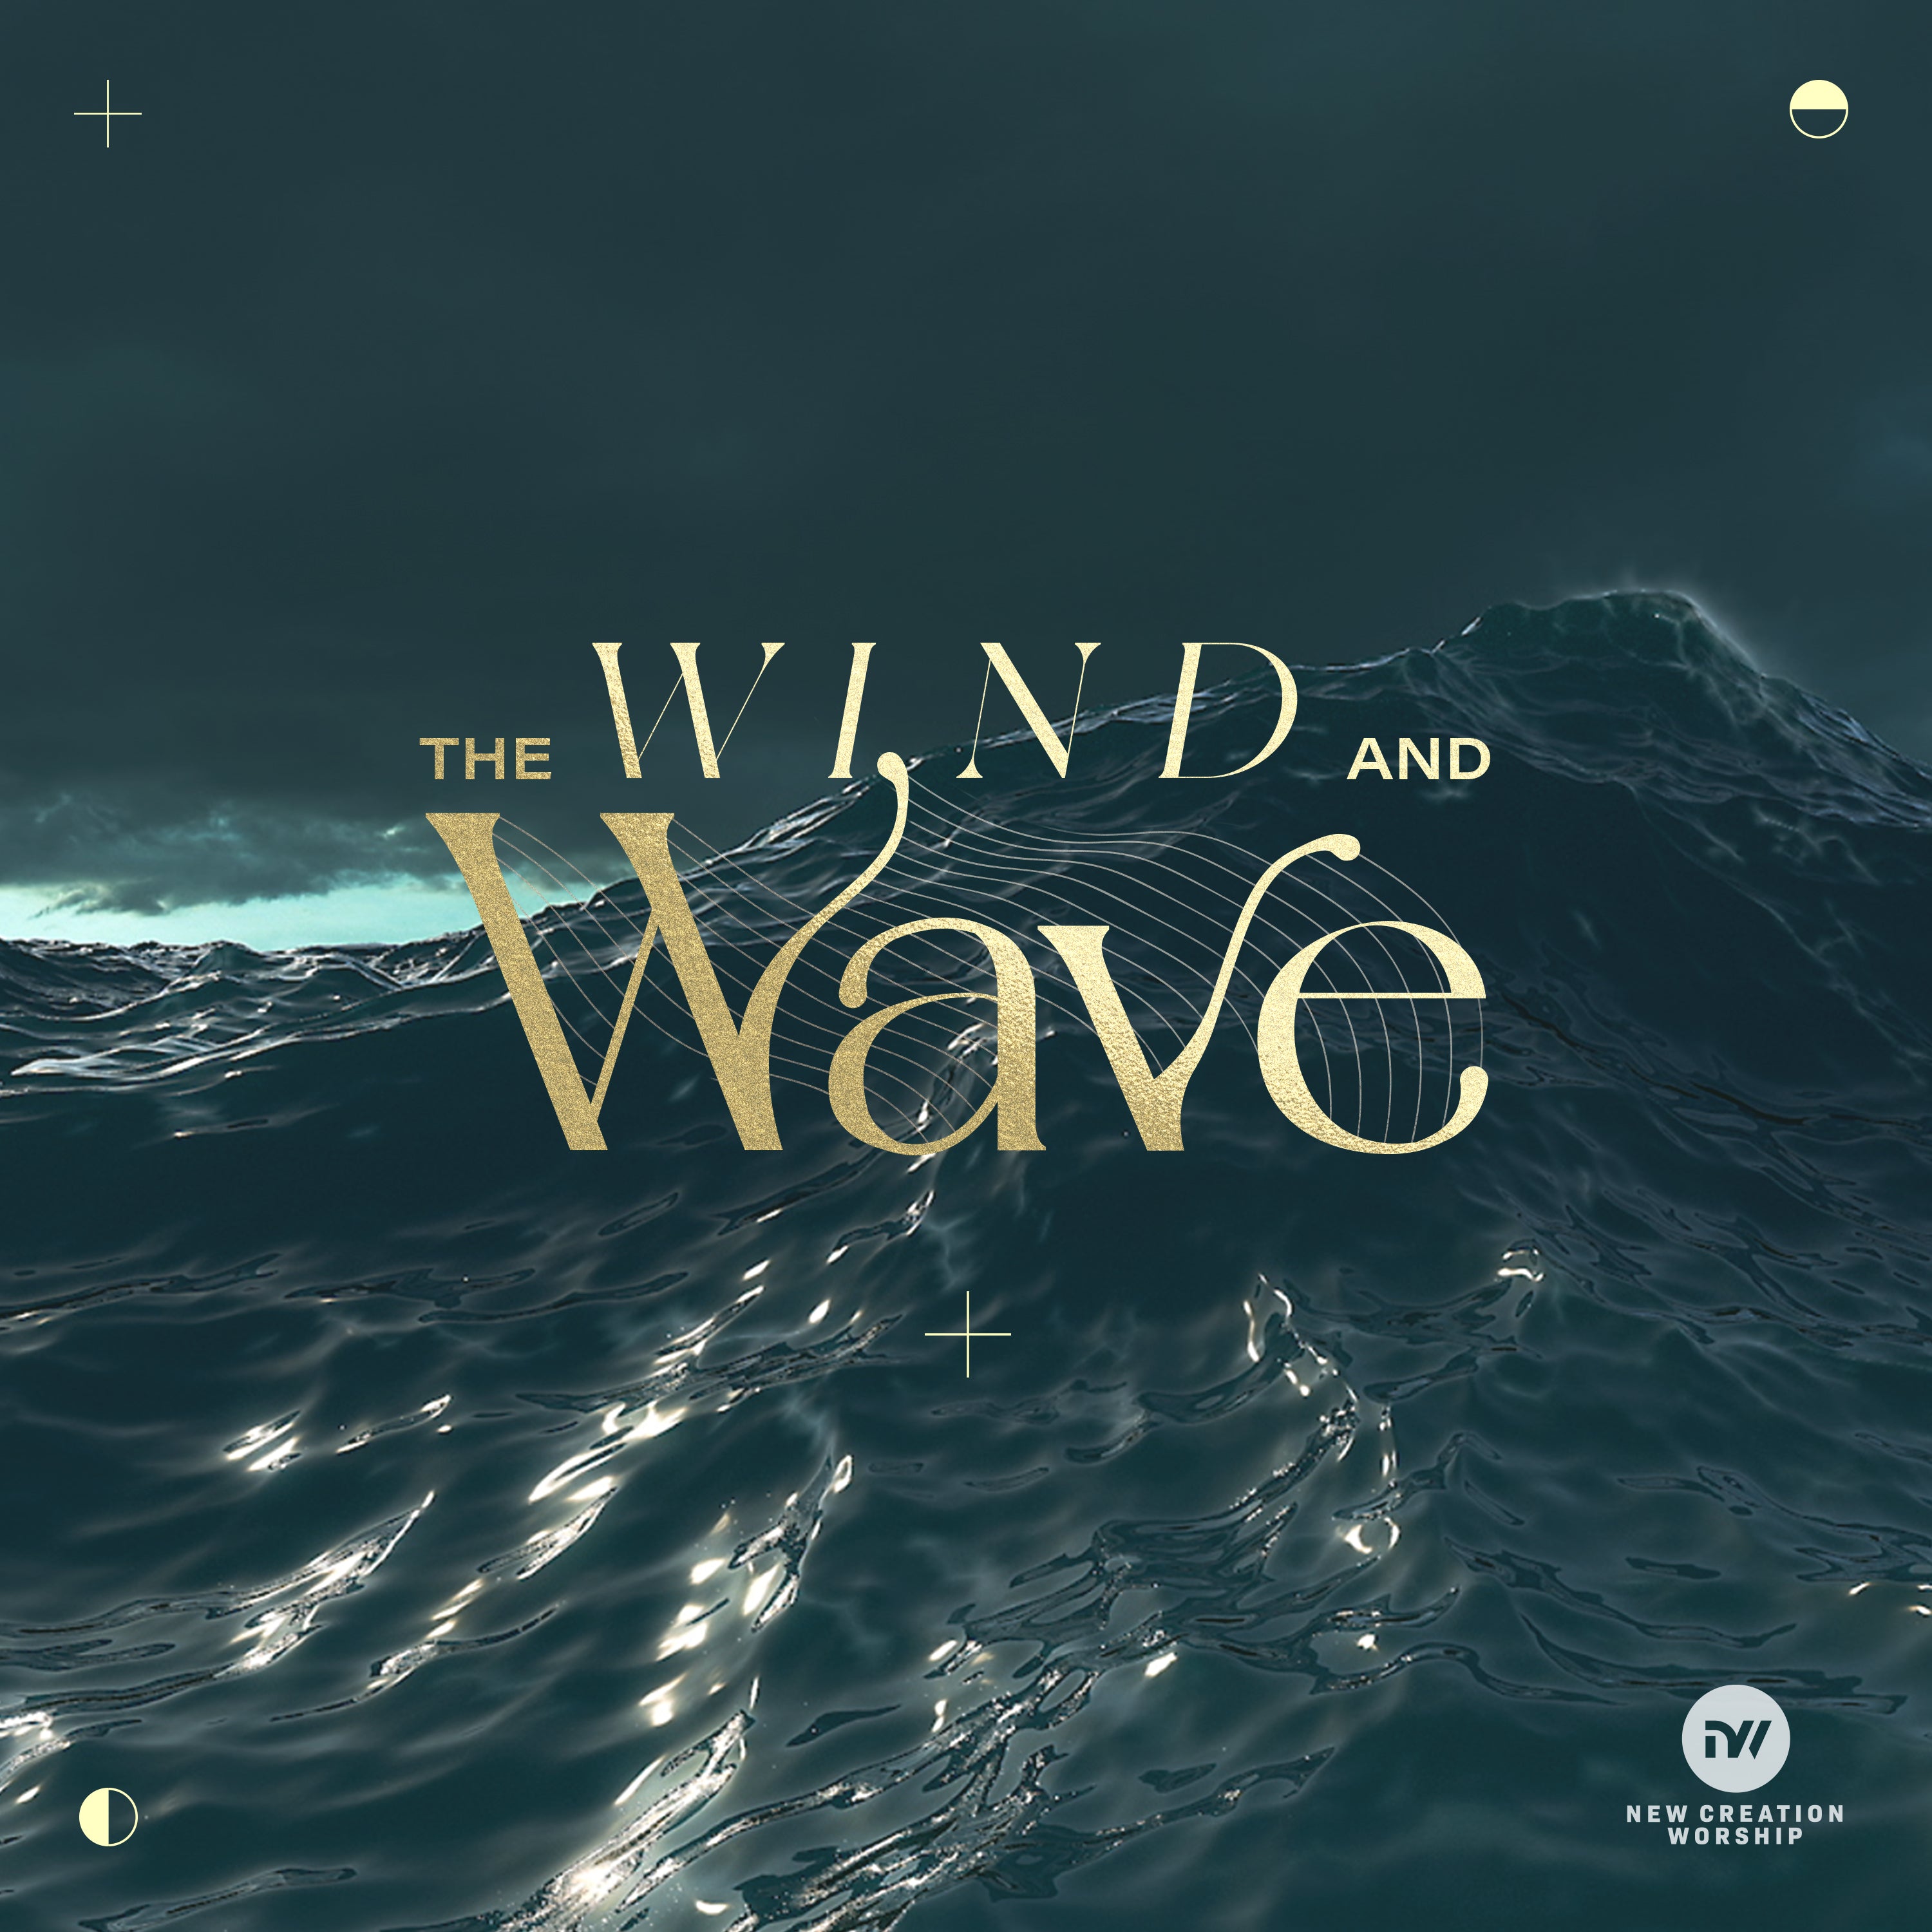 The Wind And Wave – New Creation Worship (digital mp3)